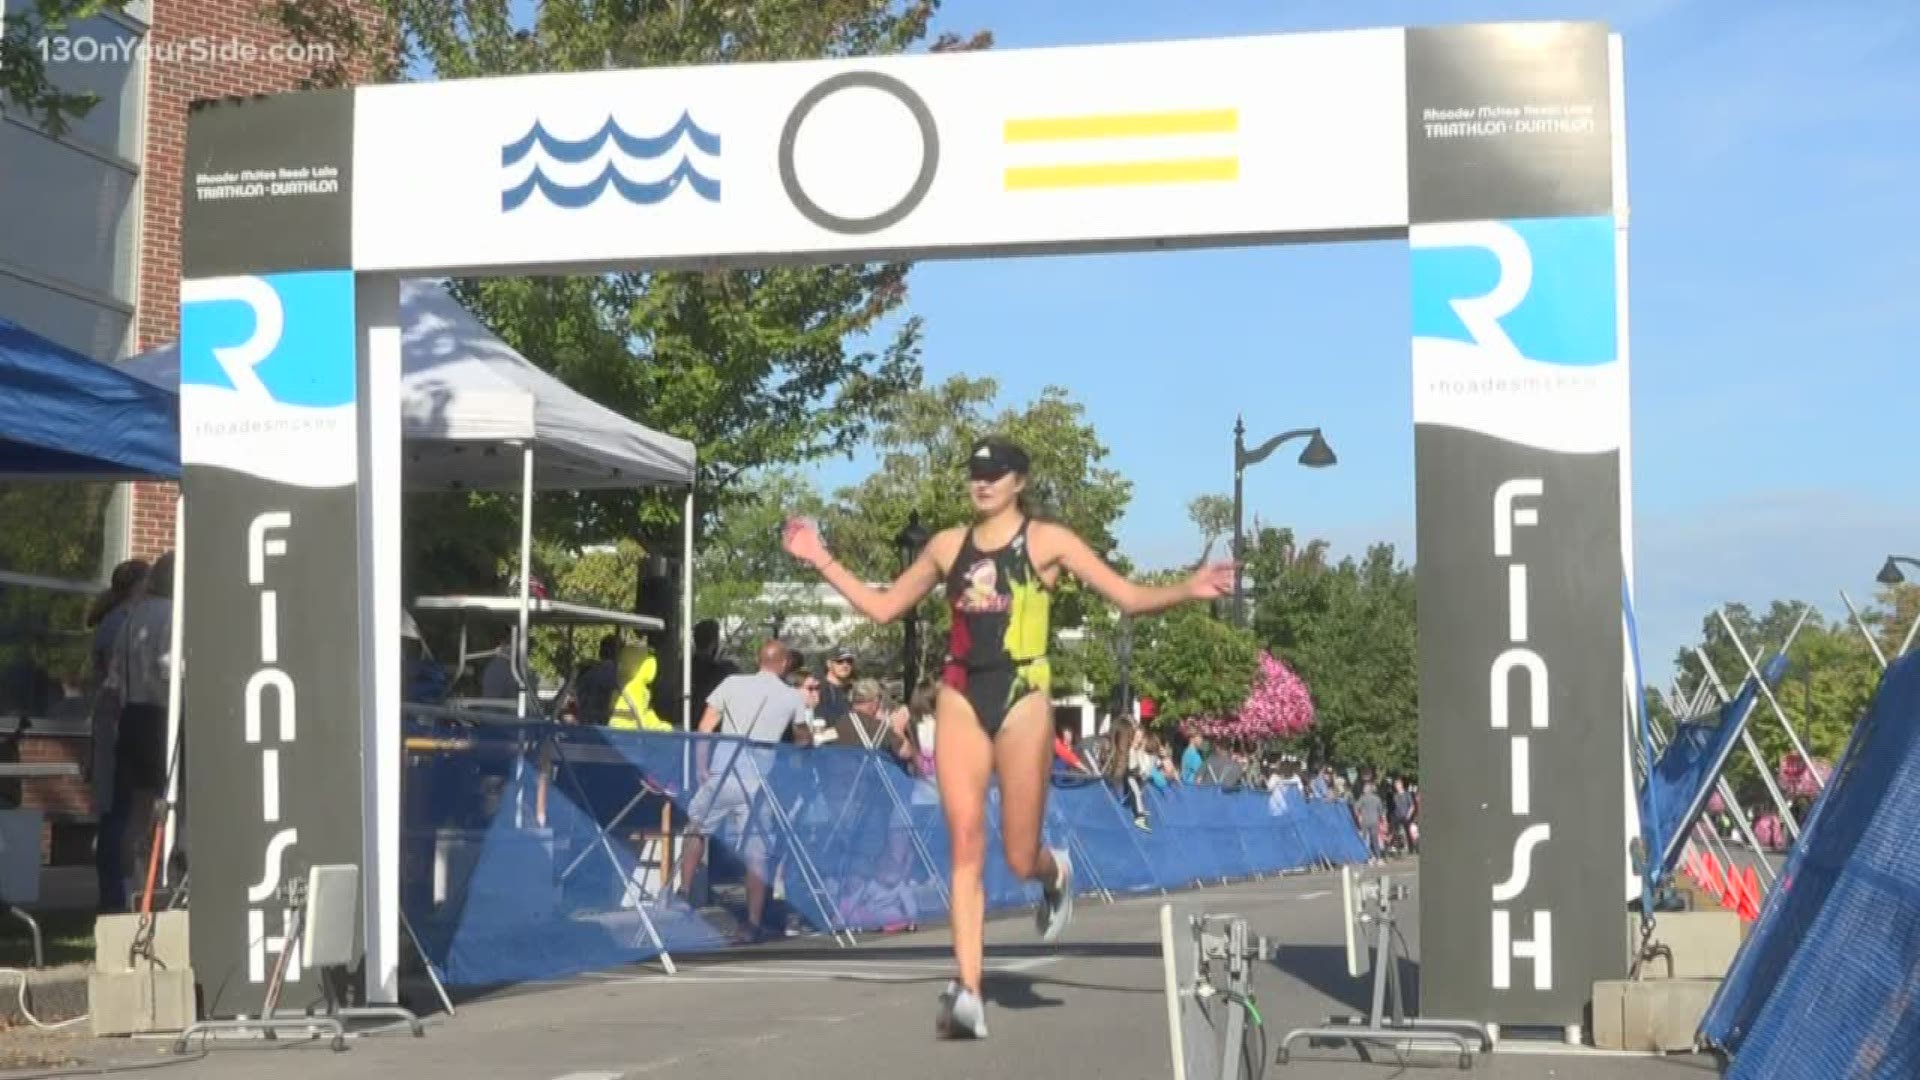 The University makes history as the first NCAA Triathlon team in the state.